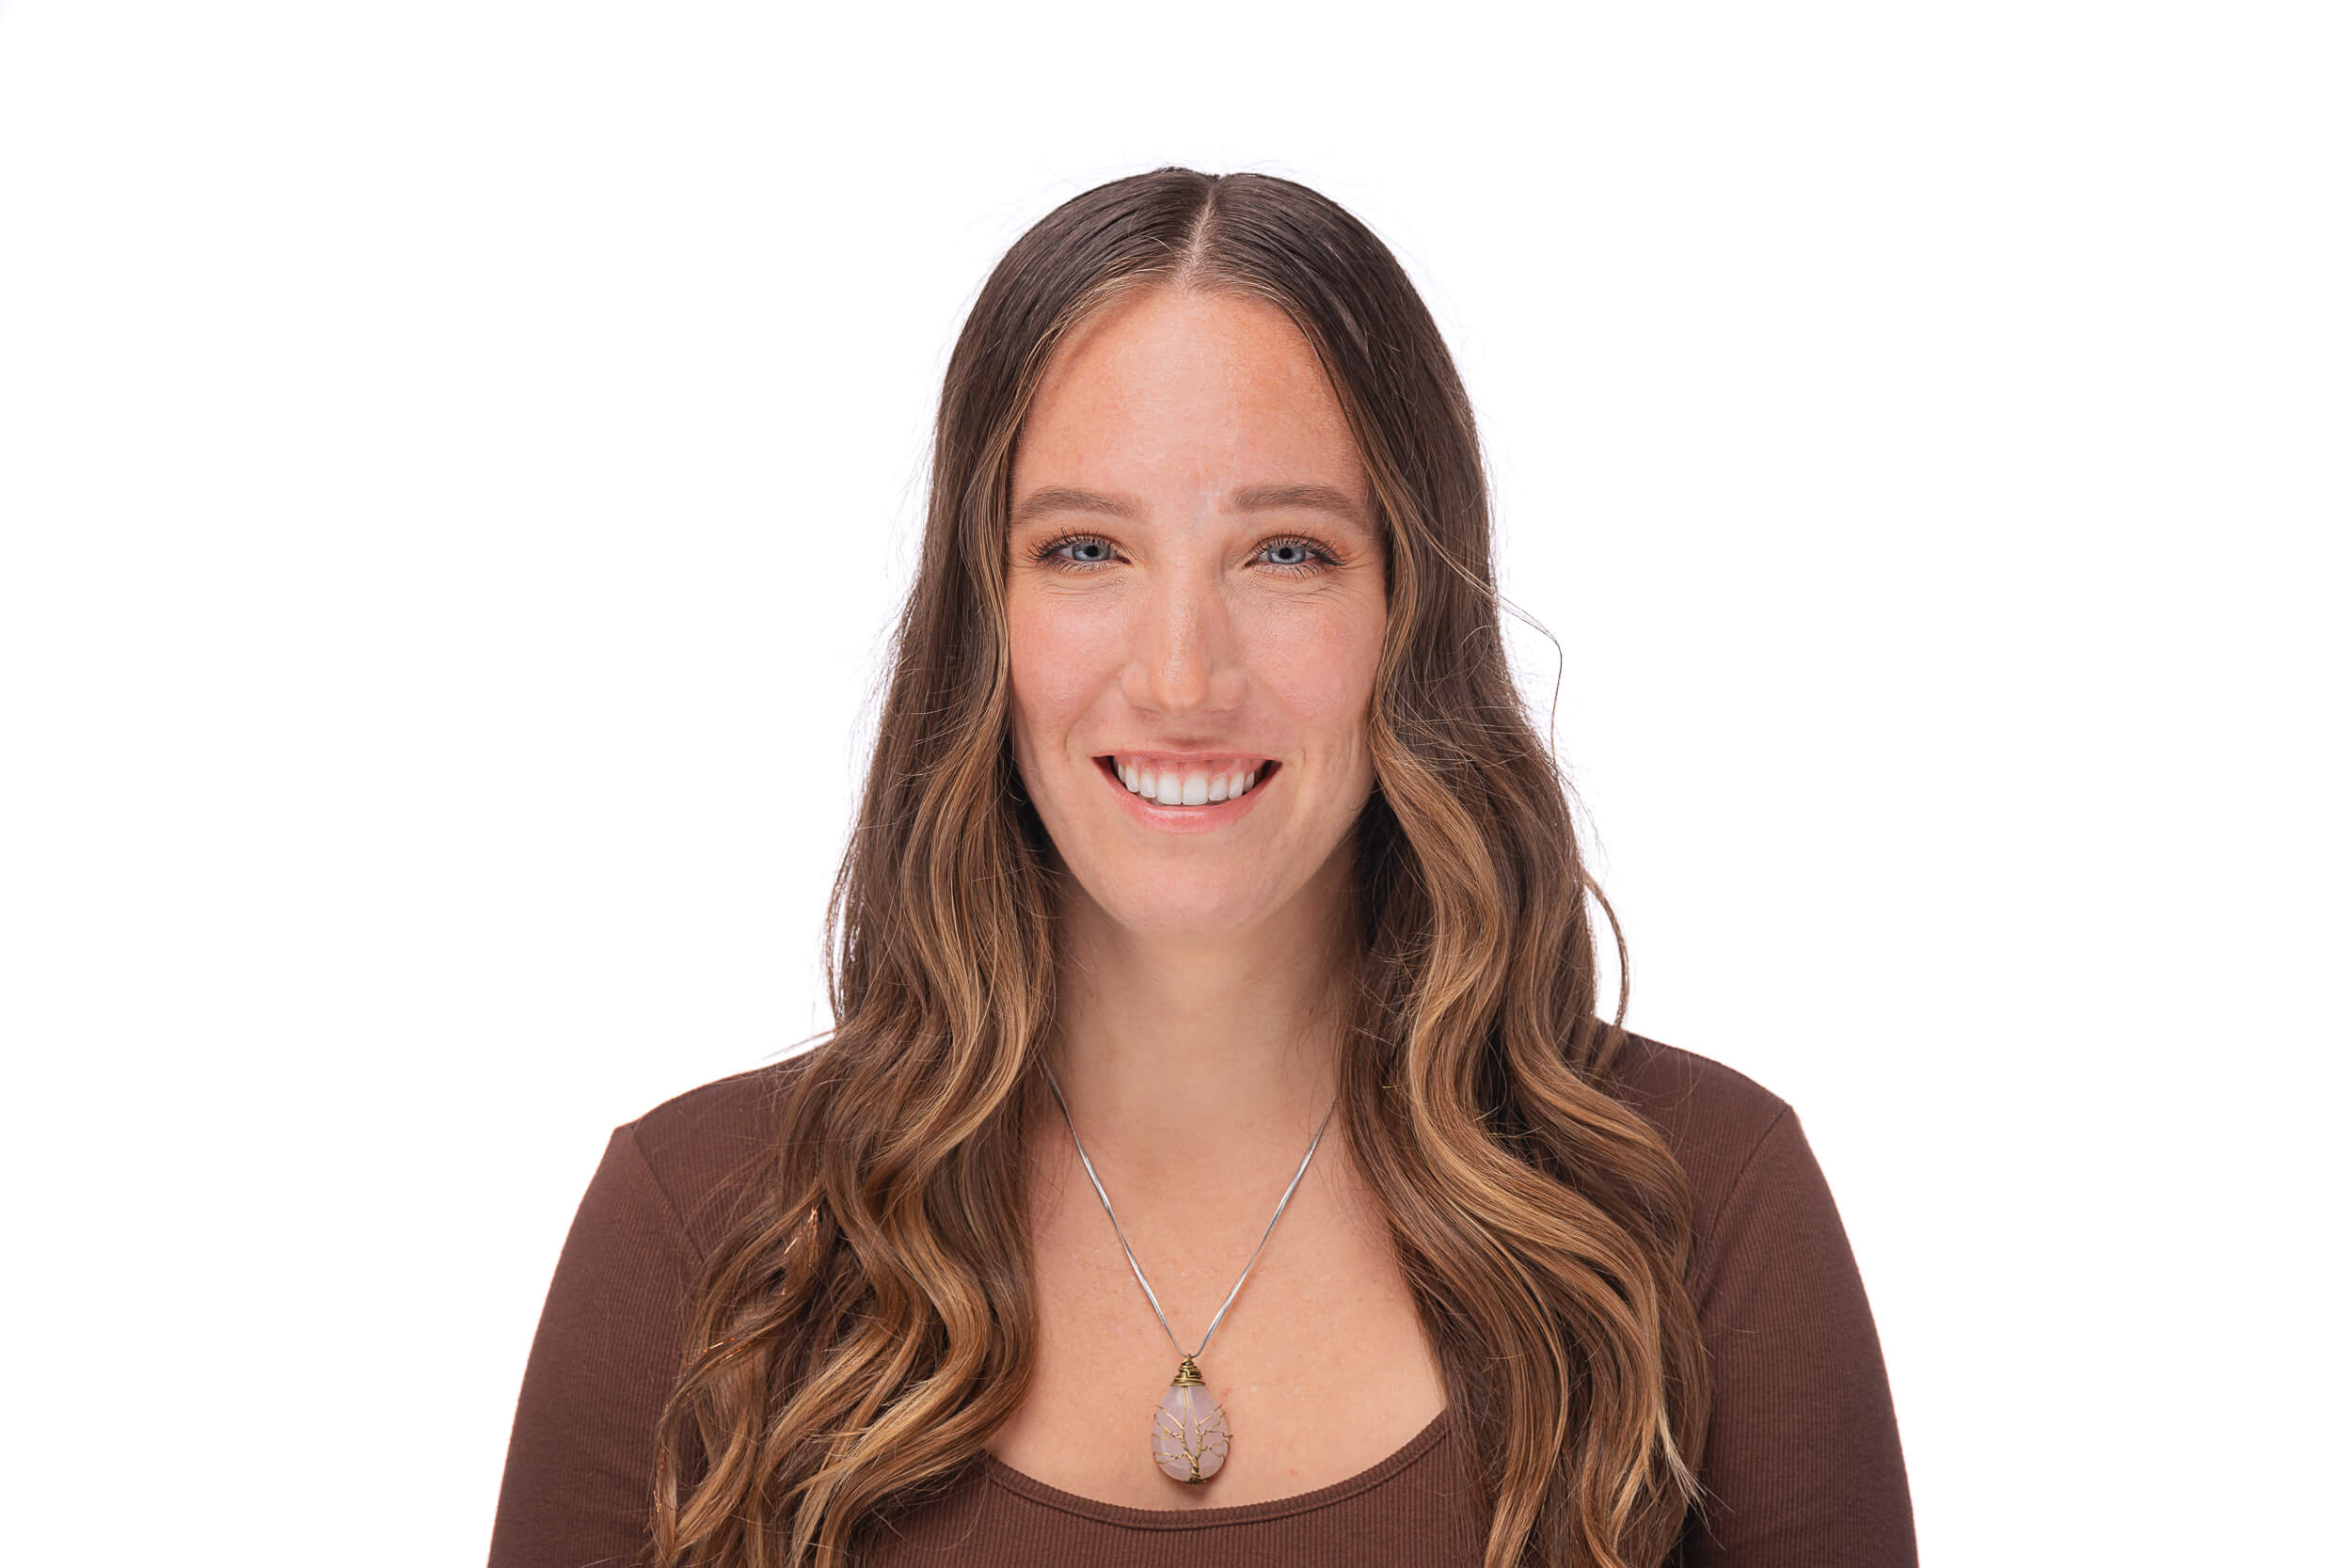 A professional headshot featuring a woman with long, wavy chestnut hair, wearing a simple brown top and a pendant necklace. She is smiling gently and looking directly at the camera with a friendly expression, set against a clean white background.